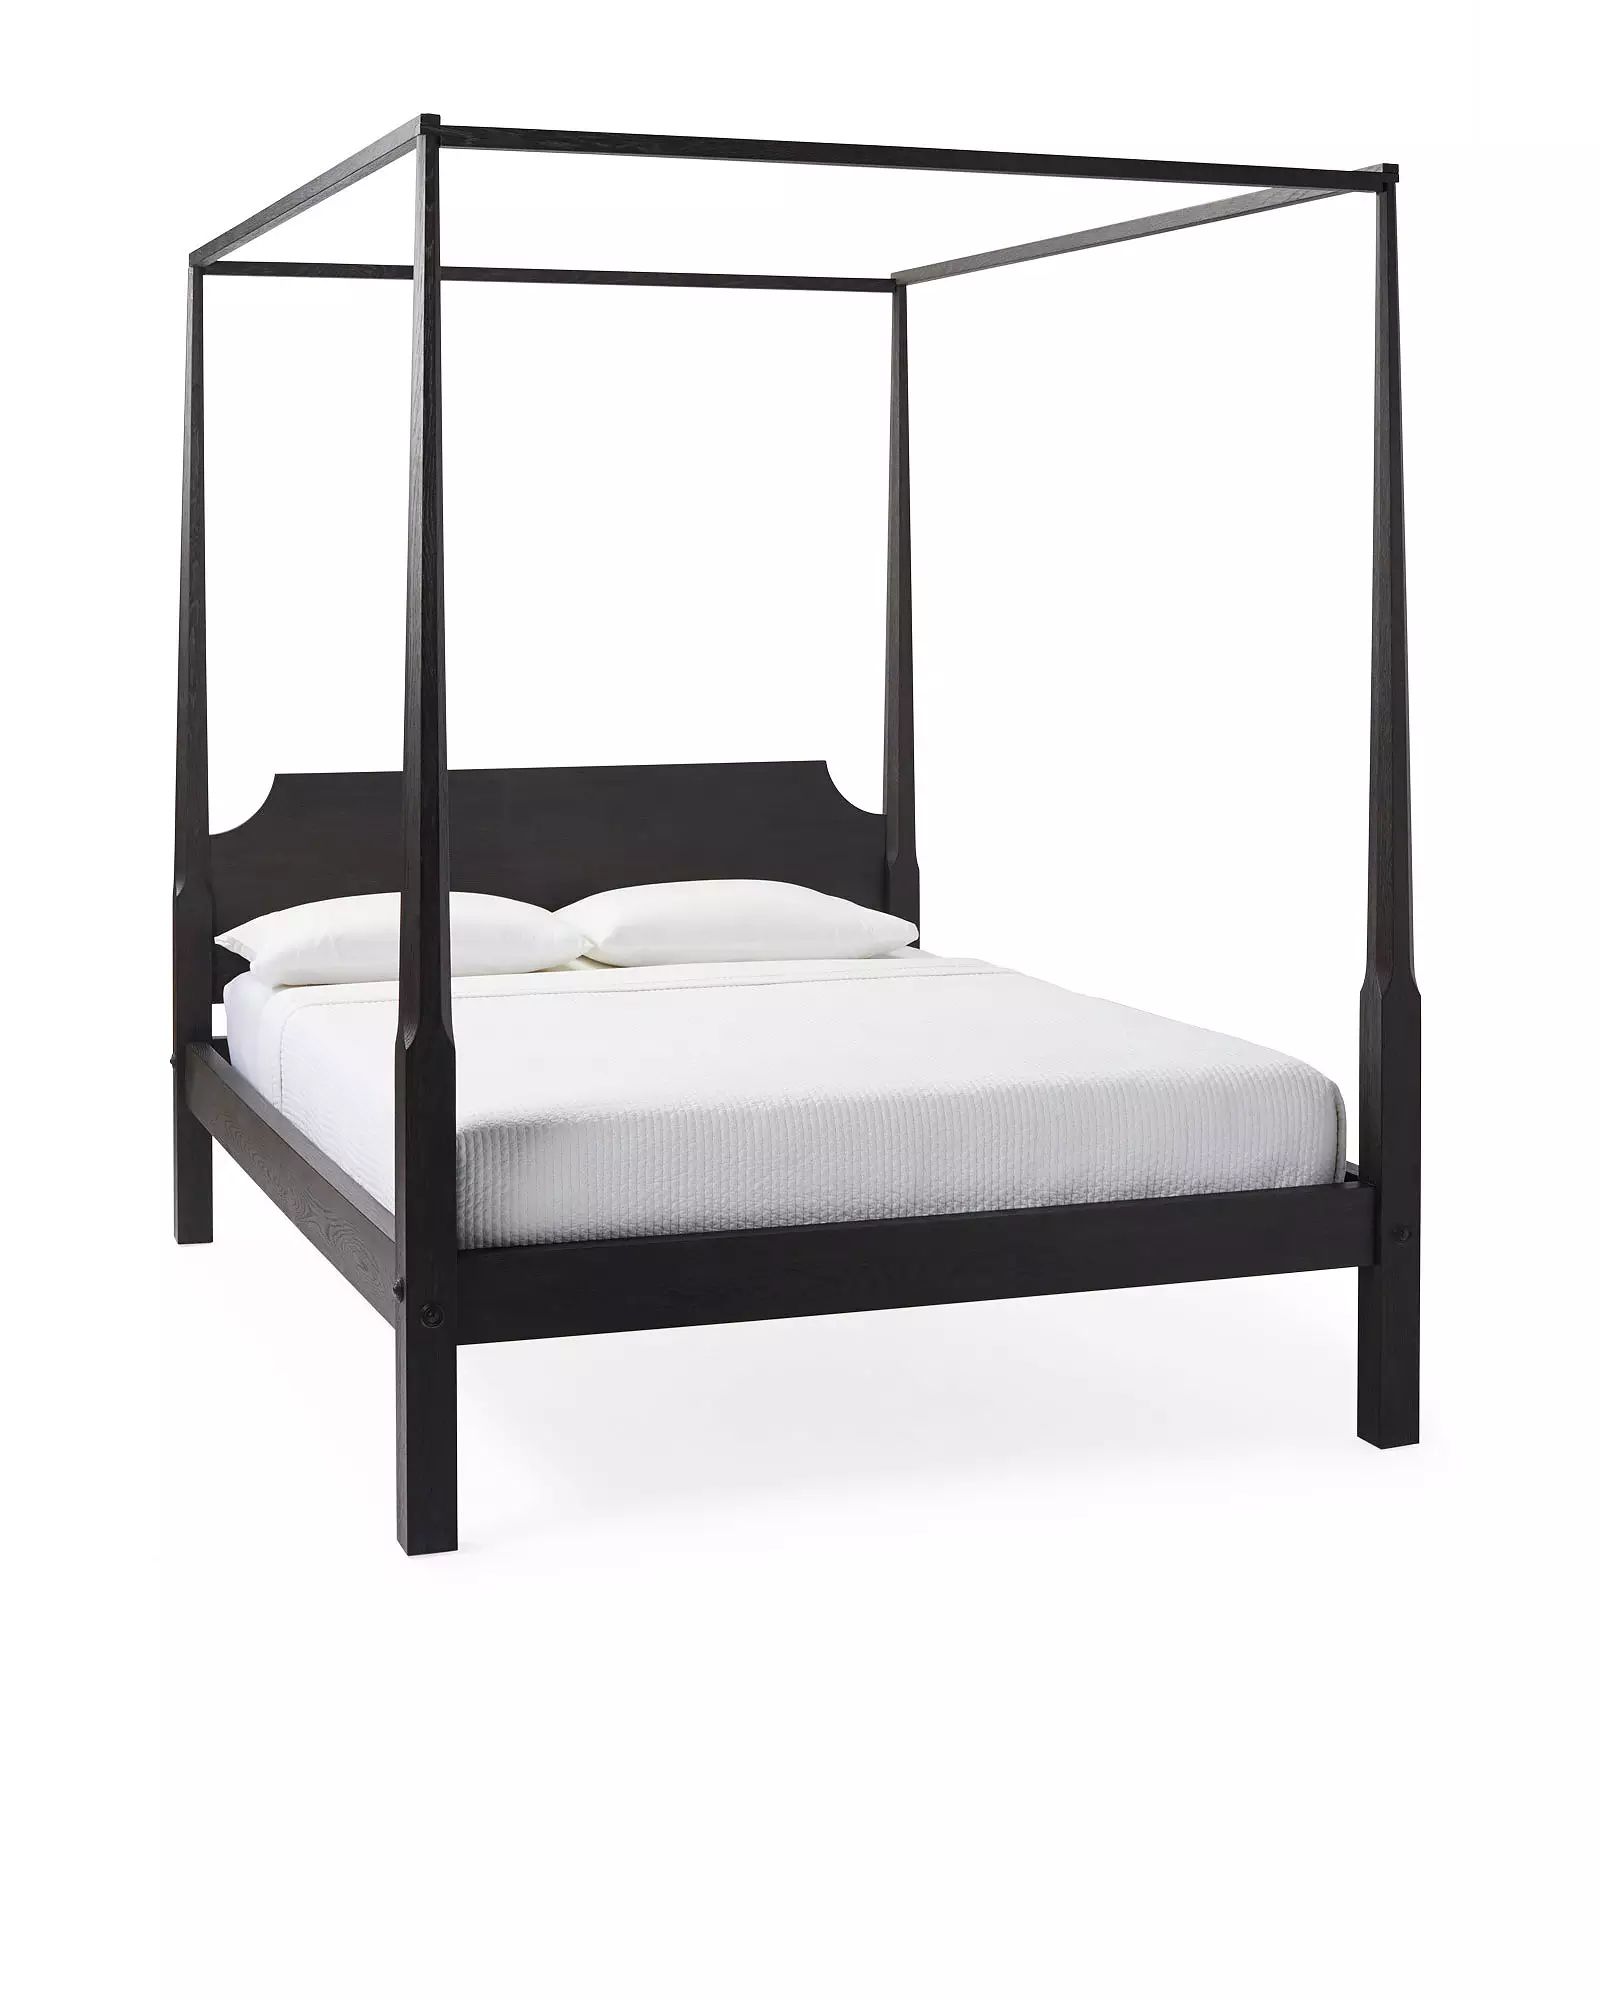 Whitaker Four Poster Bed | Serena and Lily